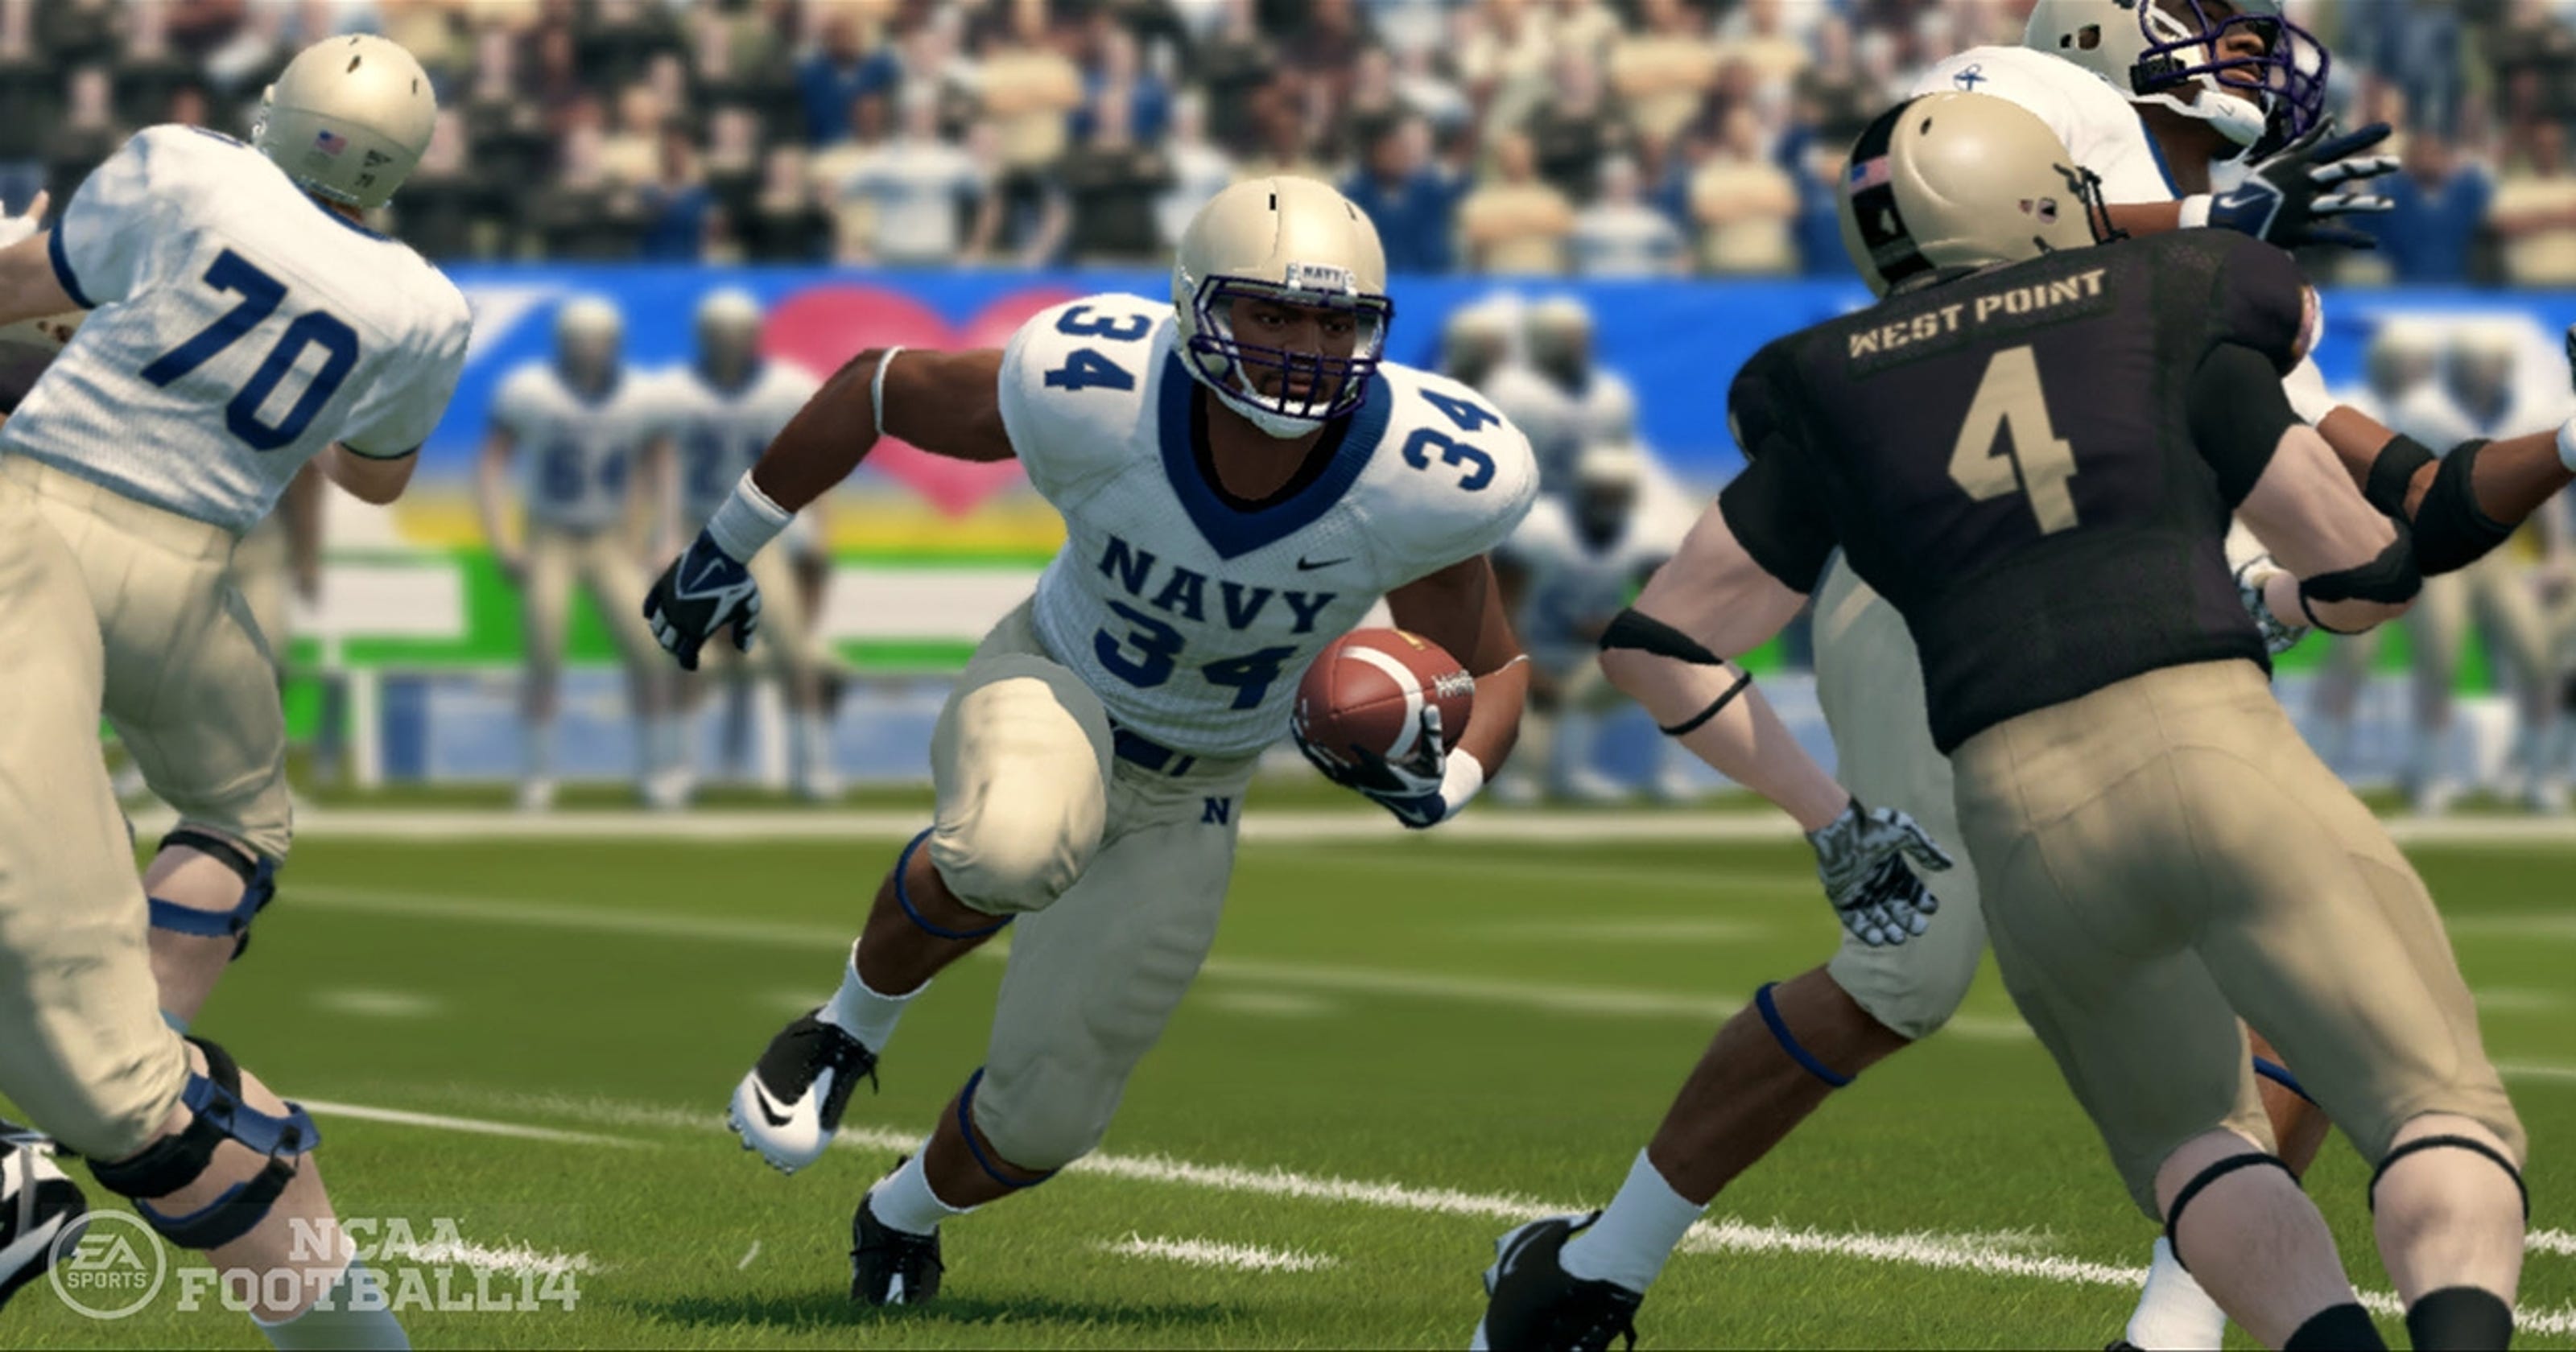 Review: 'NCAA Football 14' steps up its game